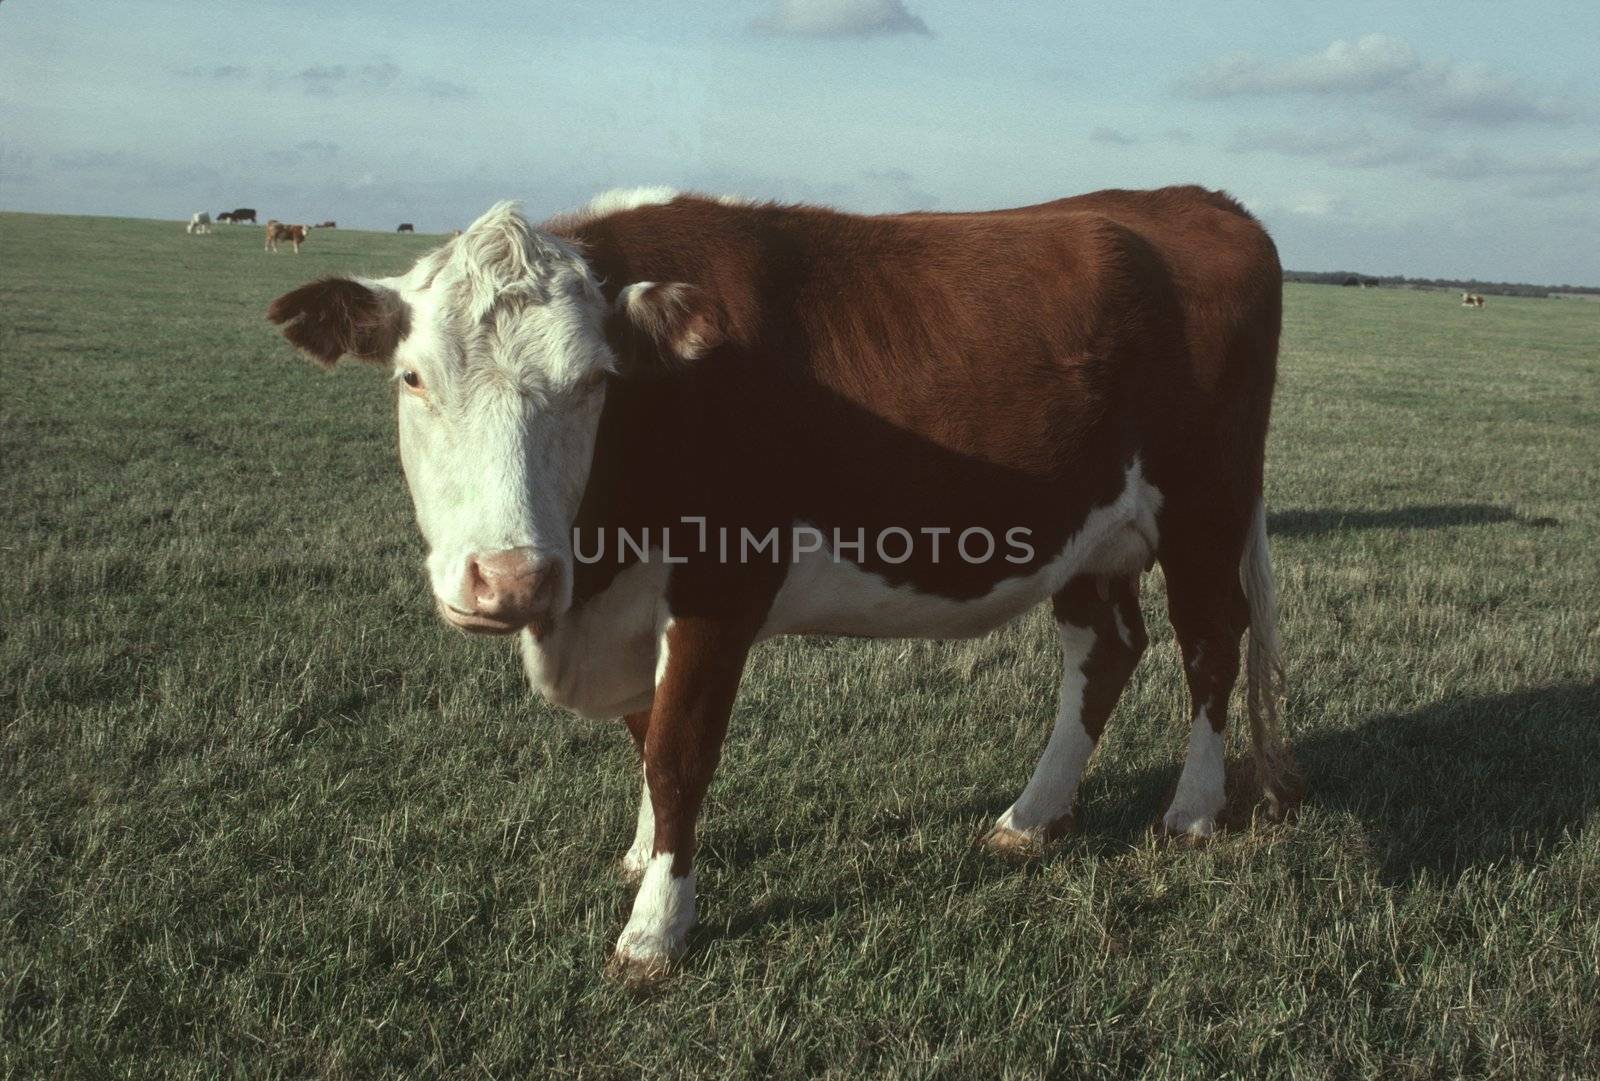 A Hereford beef cow in a pasture in Southwest England